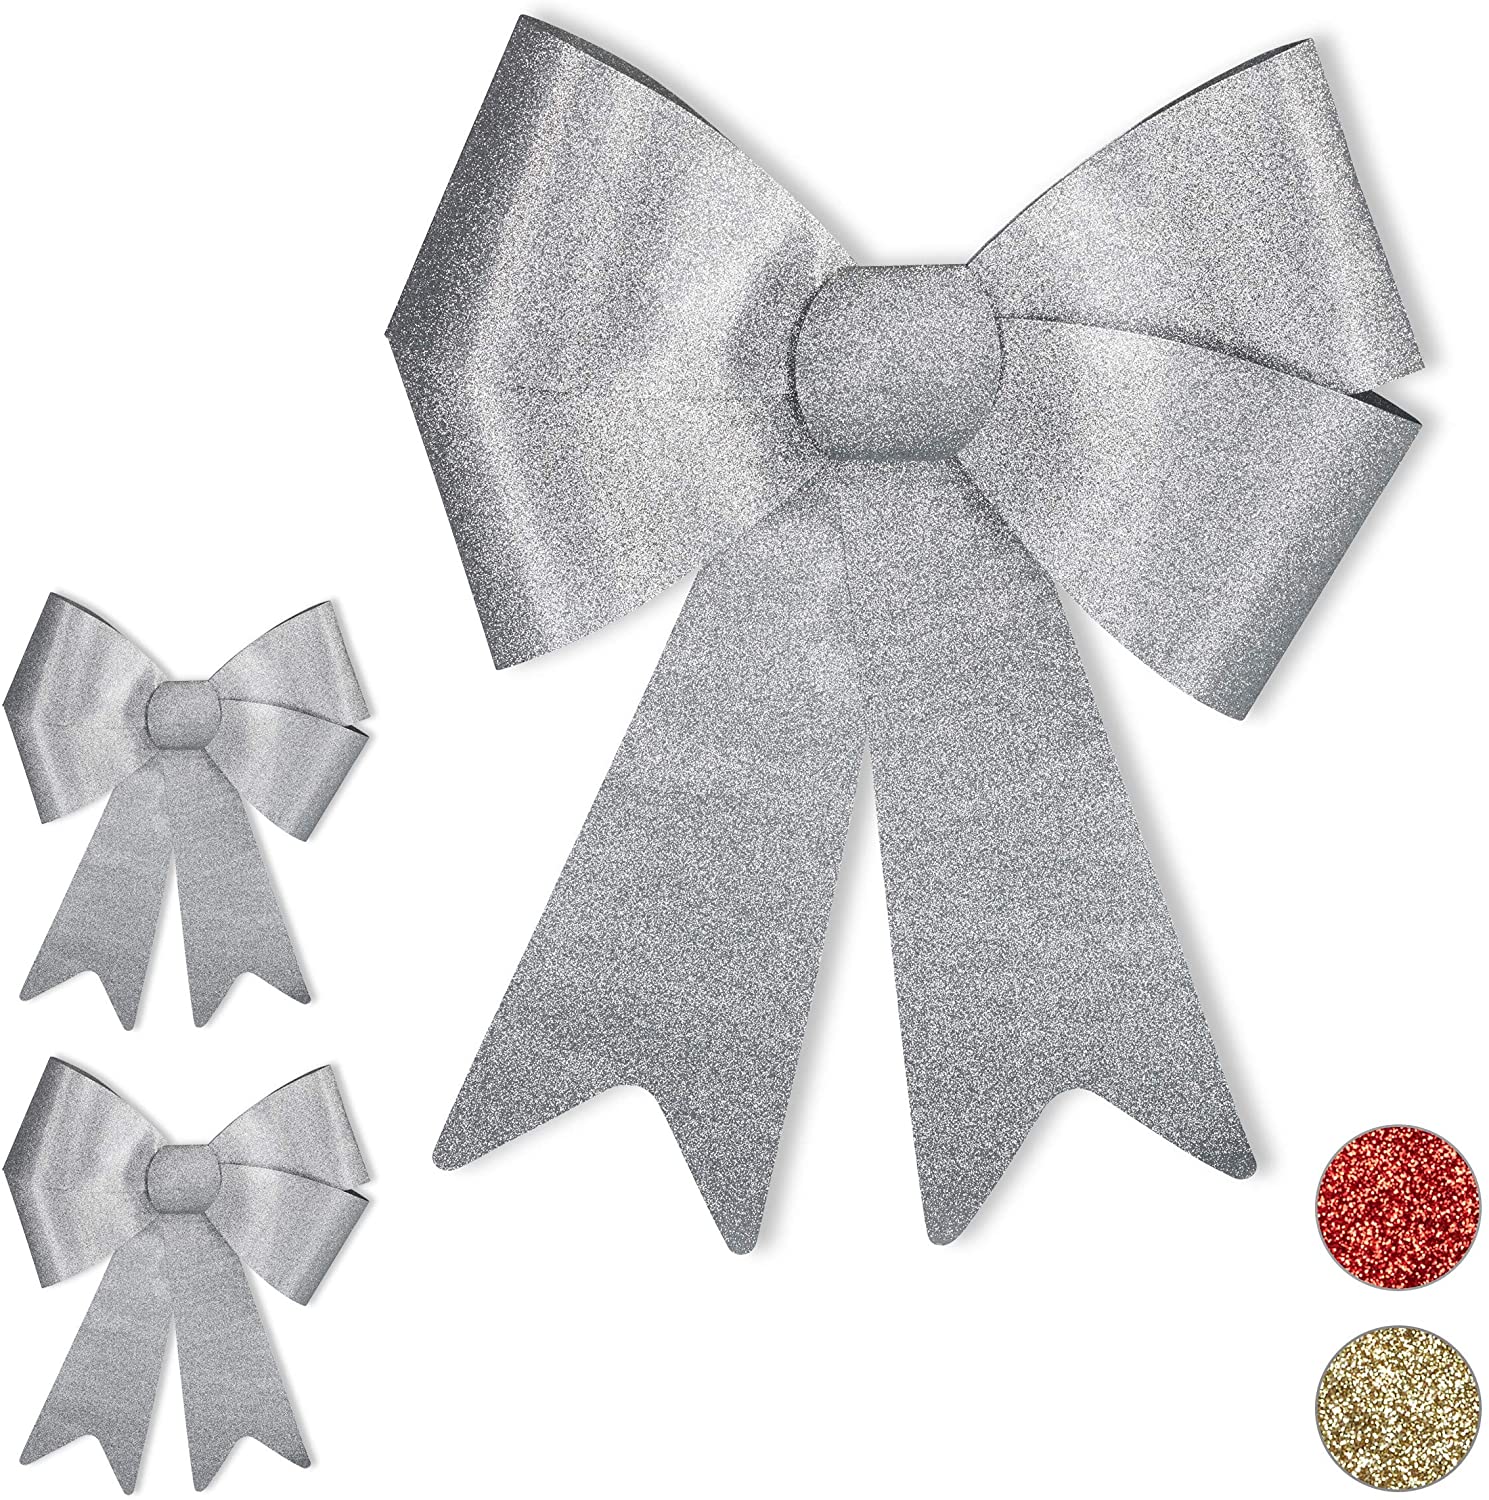 Relaxdays 3 X Xl Giant Bow For Large Gifts Glitter Decoration Wedding Car B